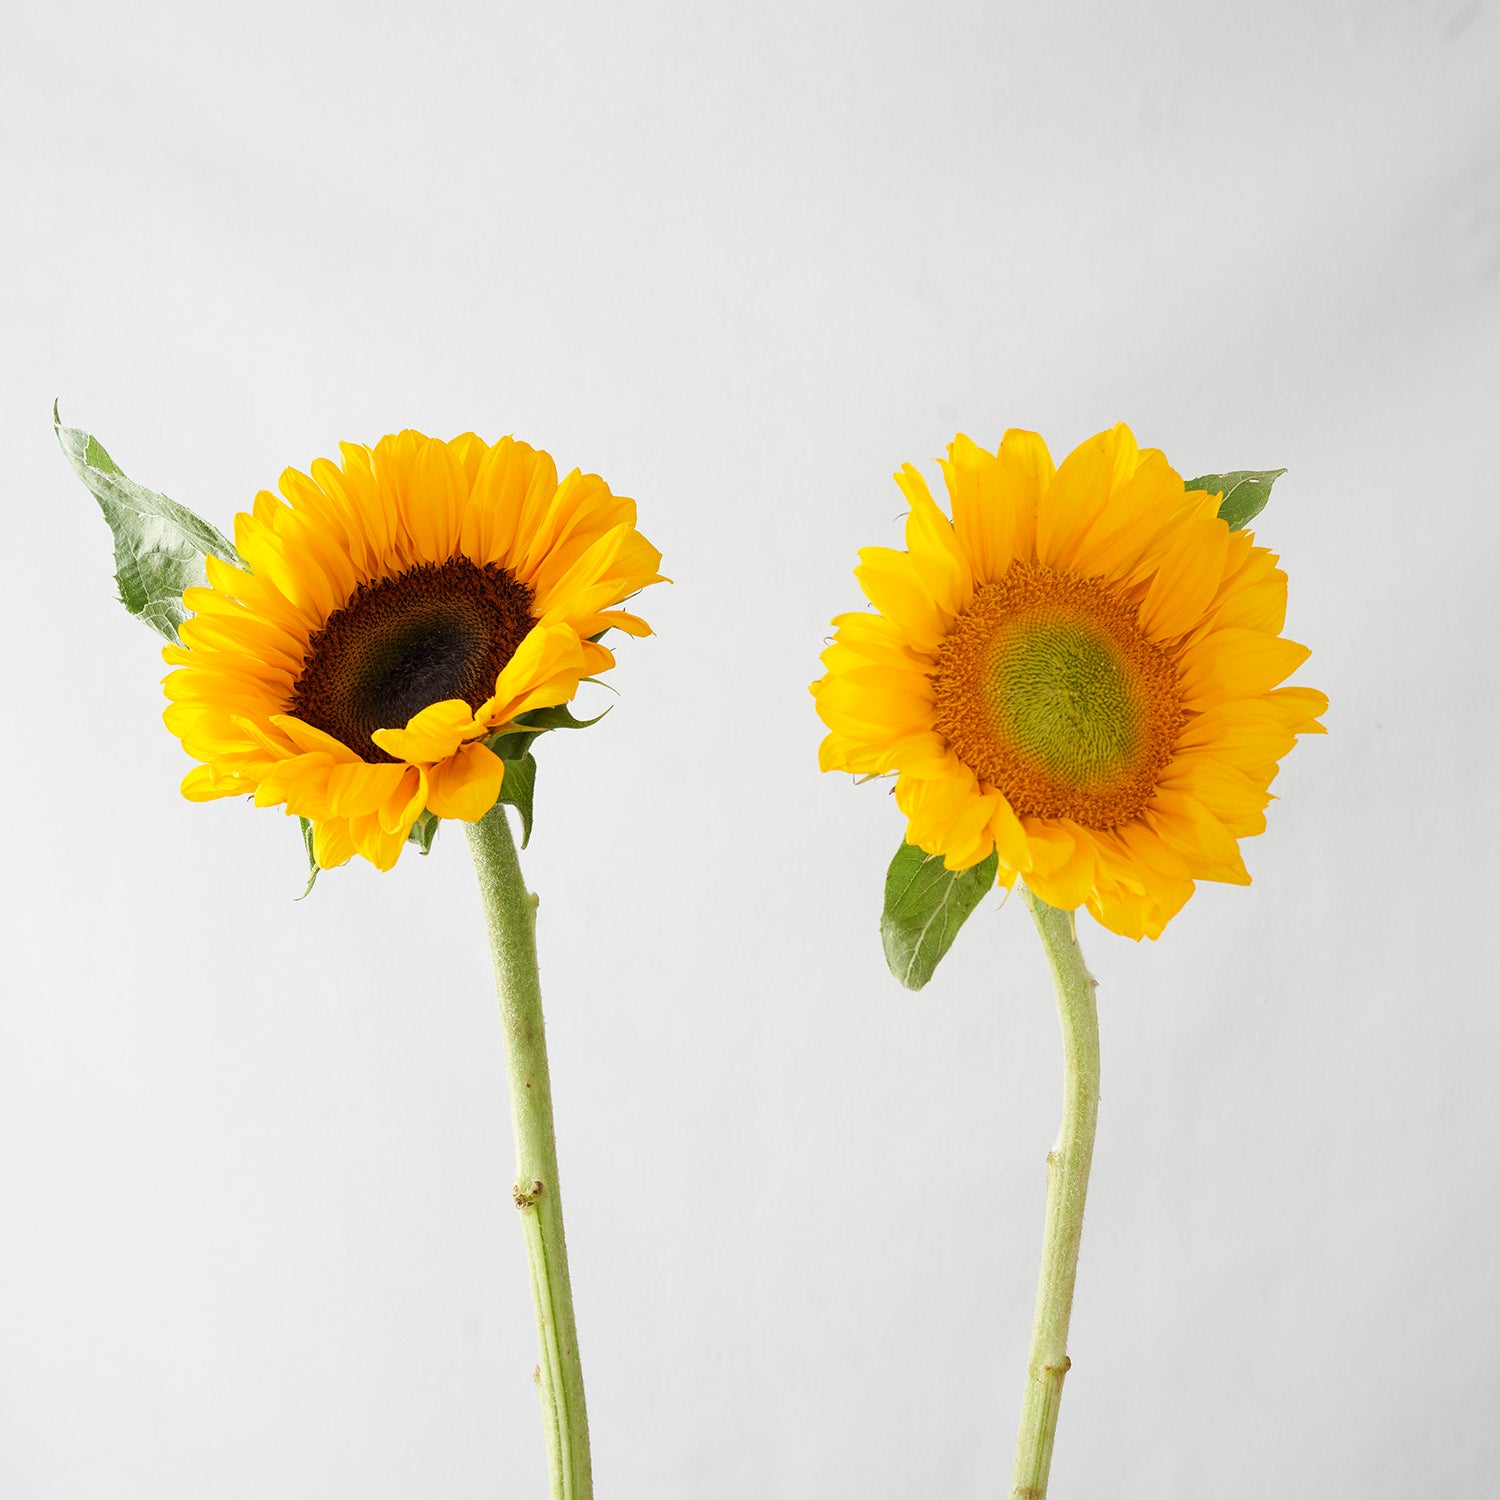 One sunflower with a brown center and one sunflower with a yellow center on white background.